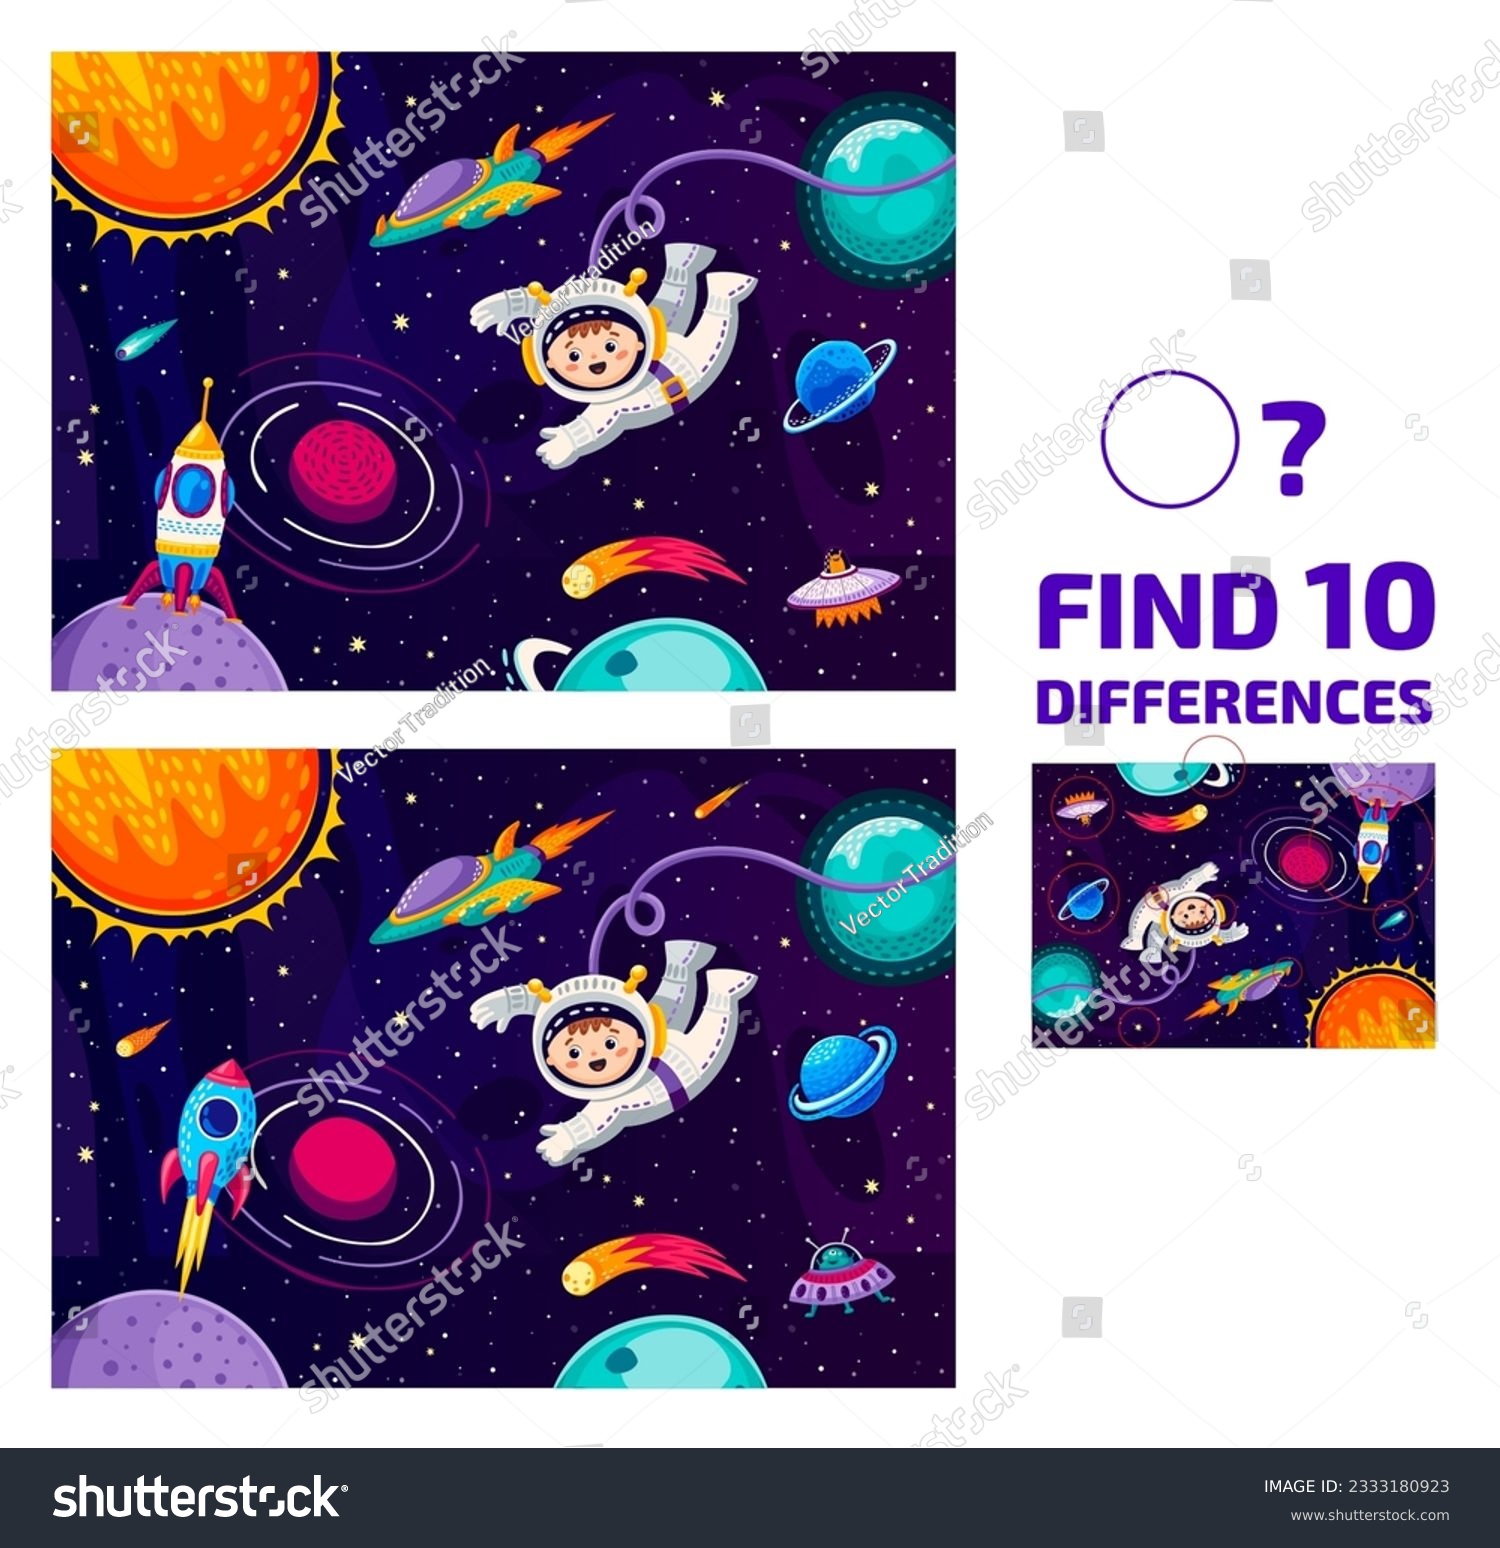 Find ten differences at galaxy landscape, astronaut in outer space and rocketship, vector puzzle game. Cartoon spaceman with alien UFO and rocket spaceship in kids quiz to find ten differences #2333180923